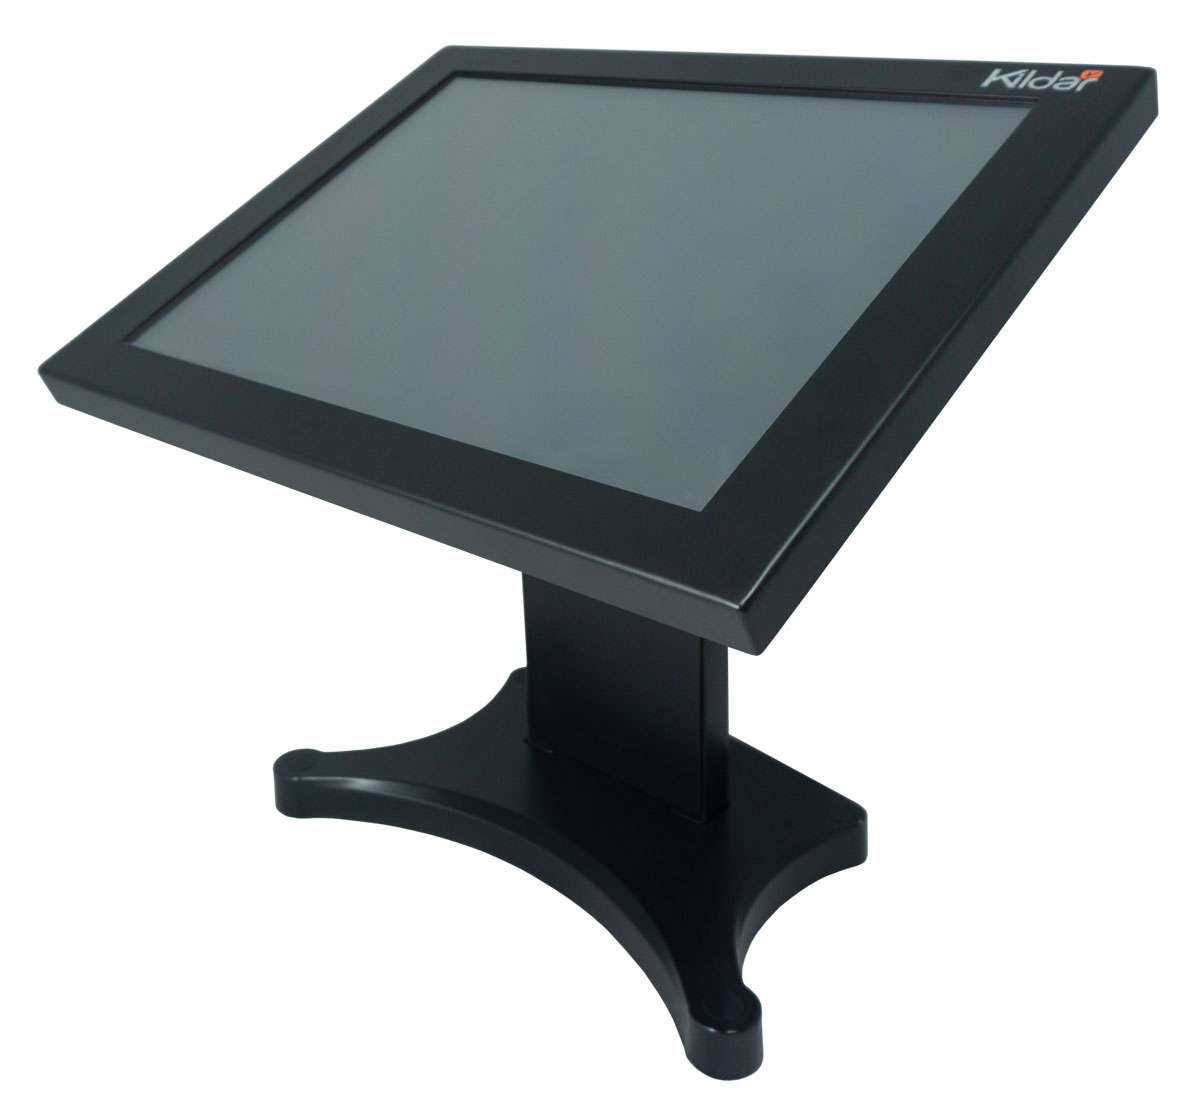 KILDAR - POS Touch Screen Terminals - DataTouch T1582 -Front